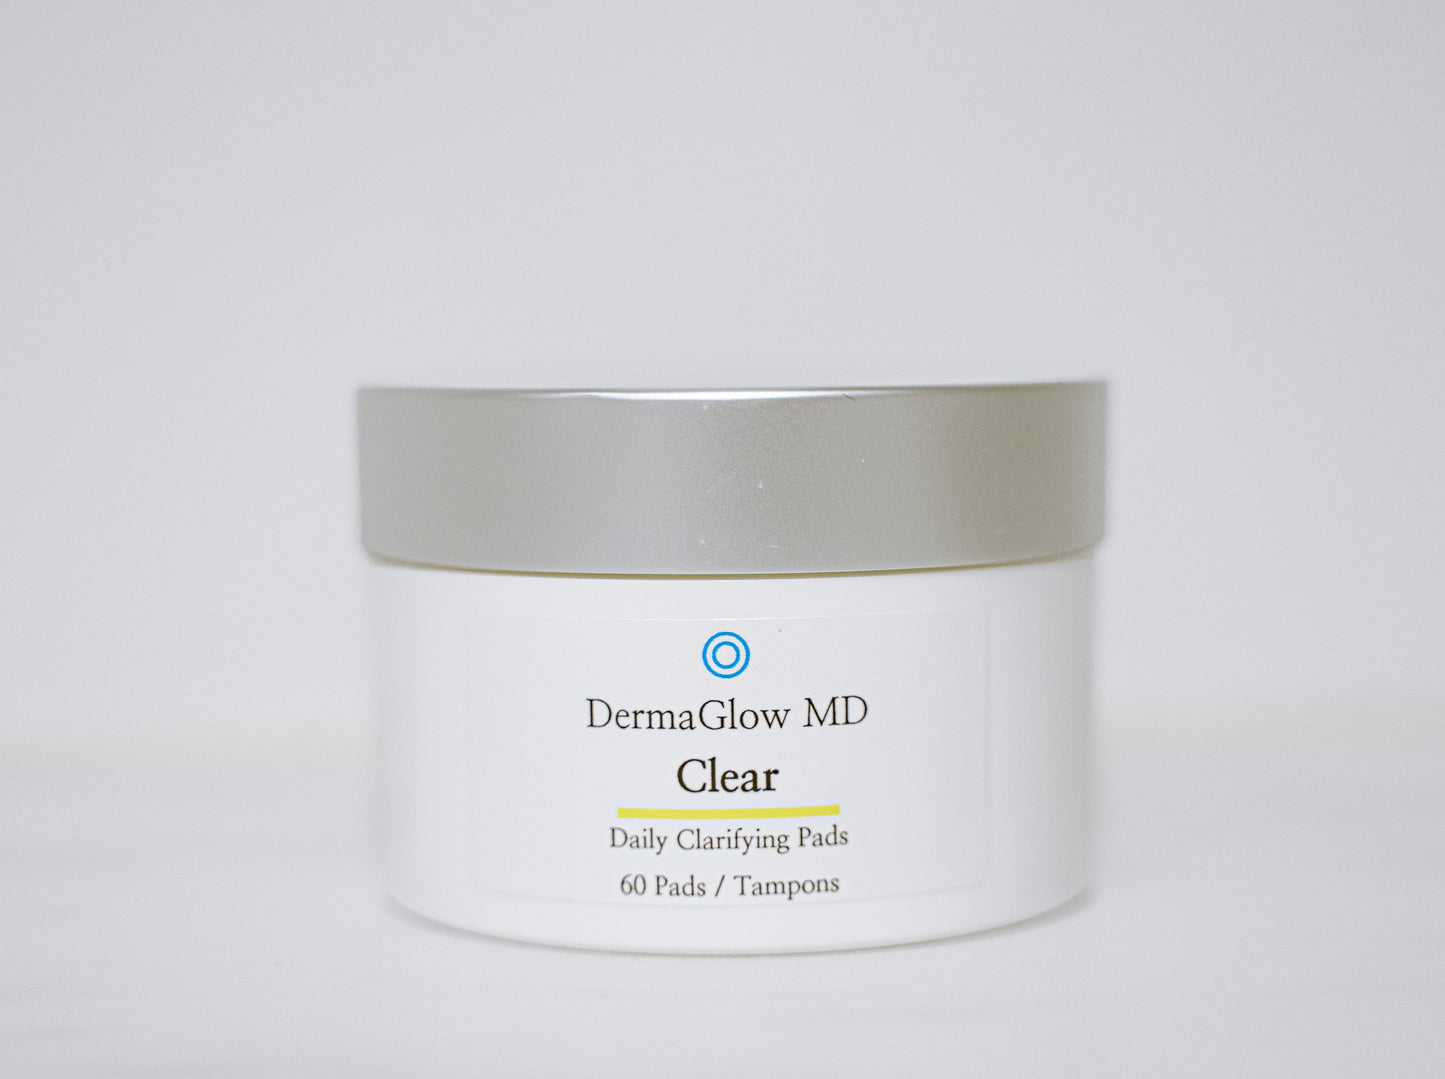 Clear | Daily Clarifying Pads